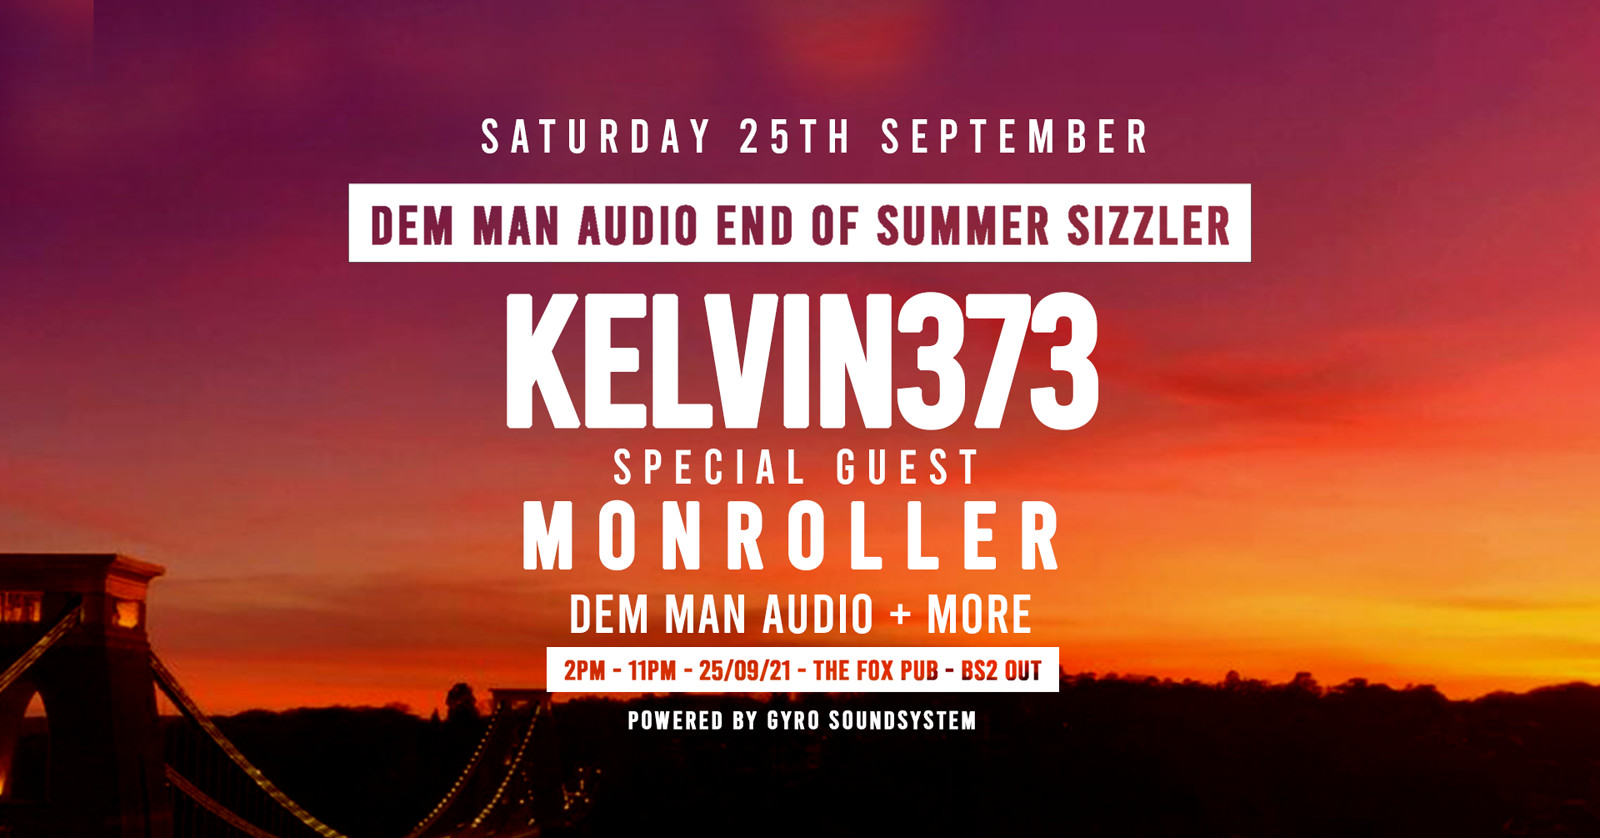 Dem Man Audio End Of Summer Sizzler at The Fox, 11 Victoria Road, BS2 0UT